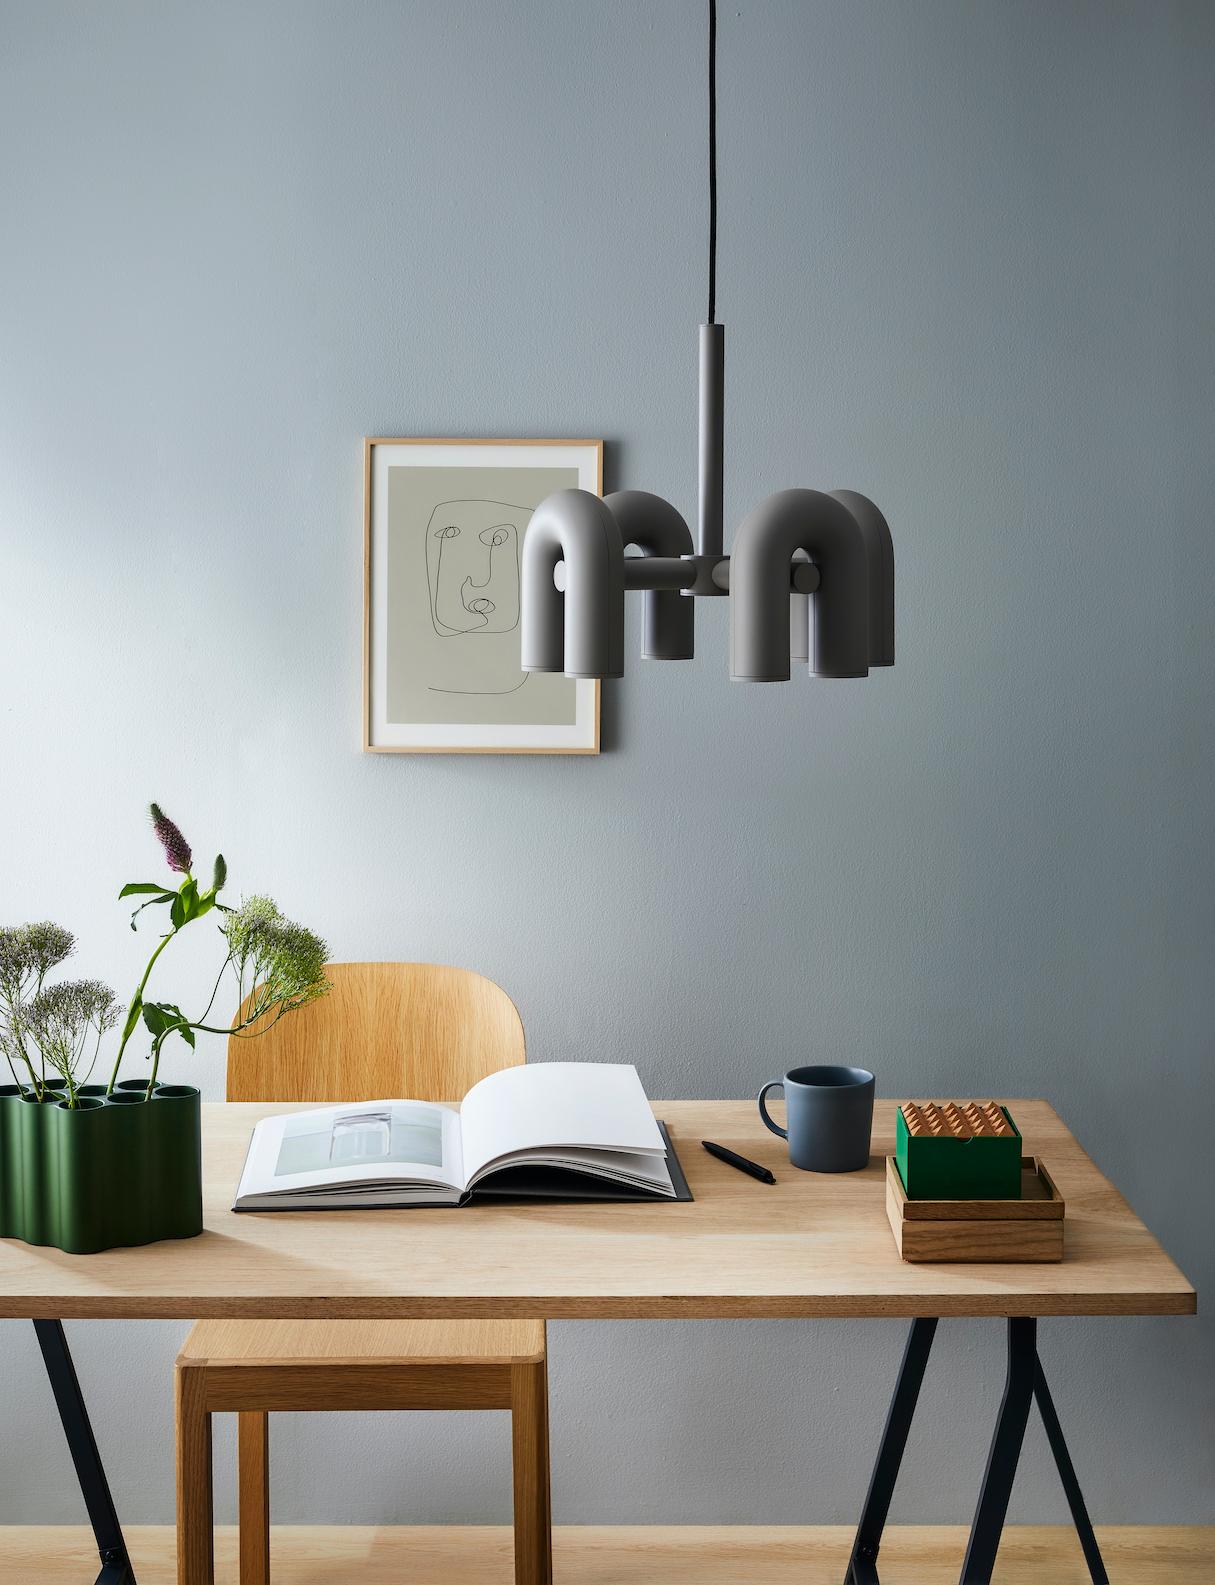 Cirkus chandelier by AGO Lighting
Coated ABS, aluminum

UL Listed
LED GU10 110-240V (not included)

Two sizes available: 4 pairs of lamps / 6 pairs of lamps
Four colors available: Charcoal, grey, green, terracotta


AGO is a Korean design studio